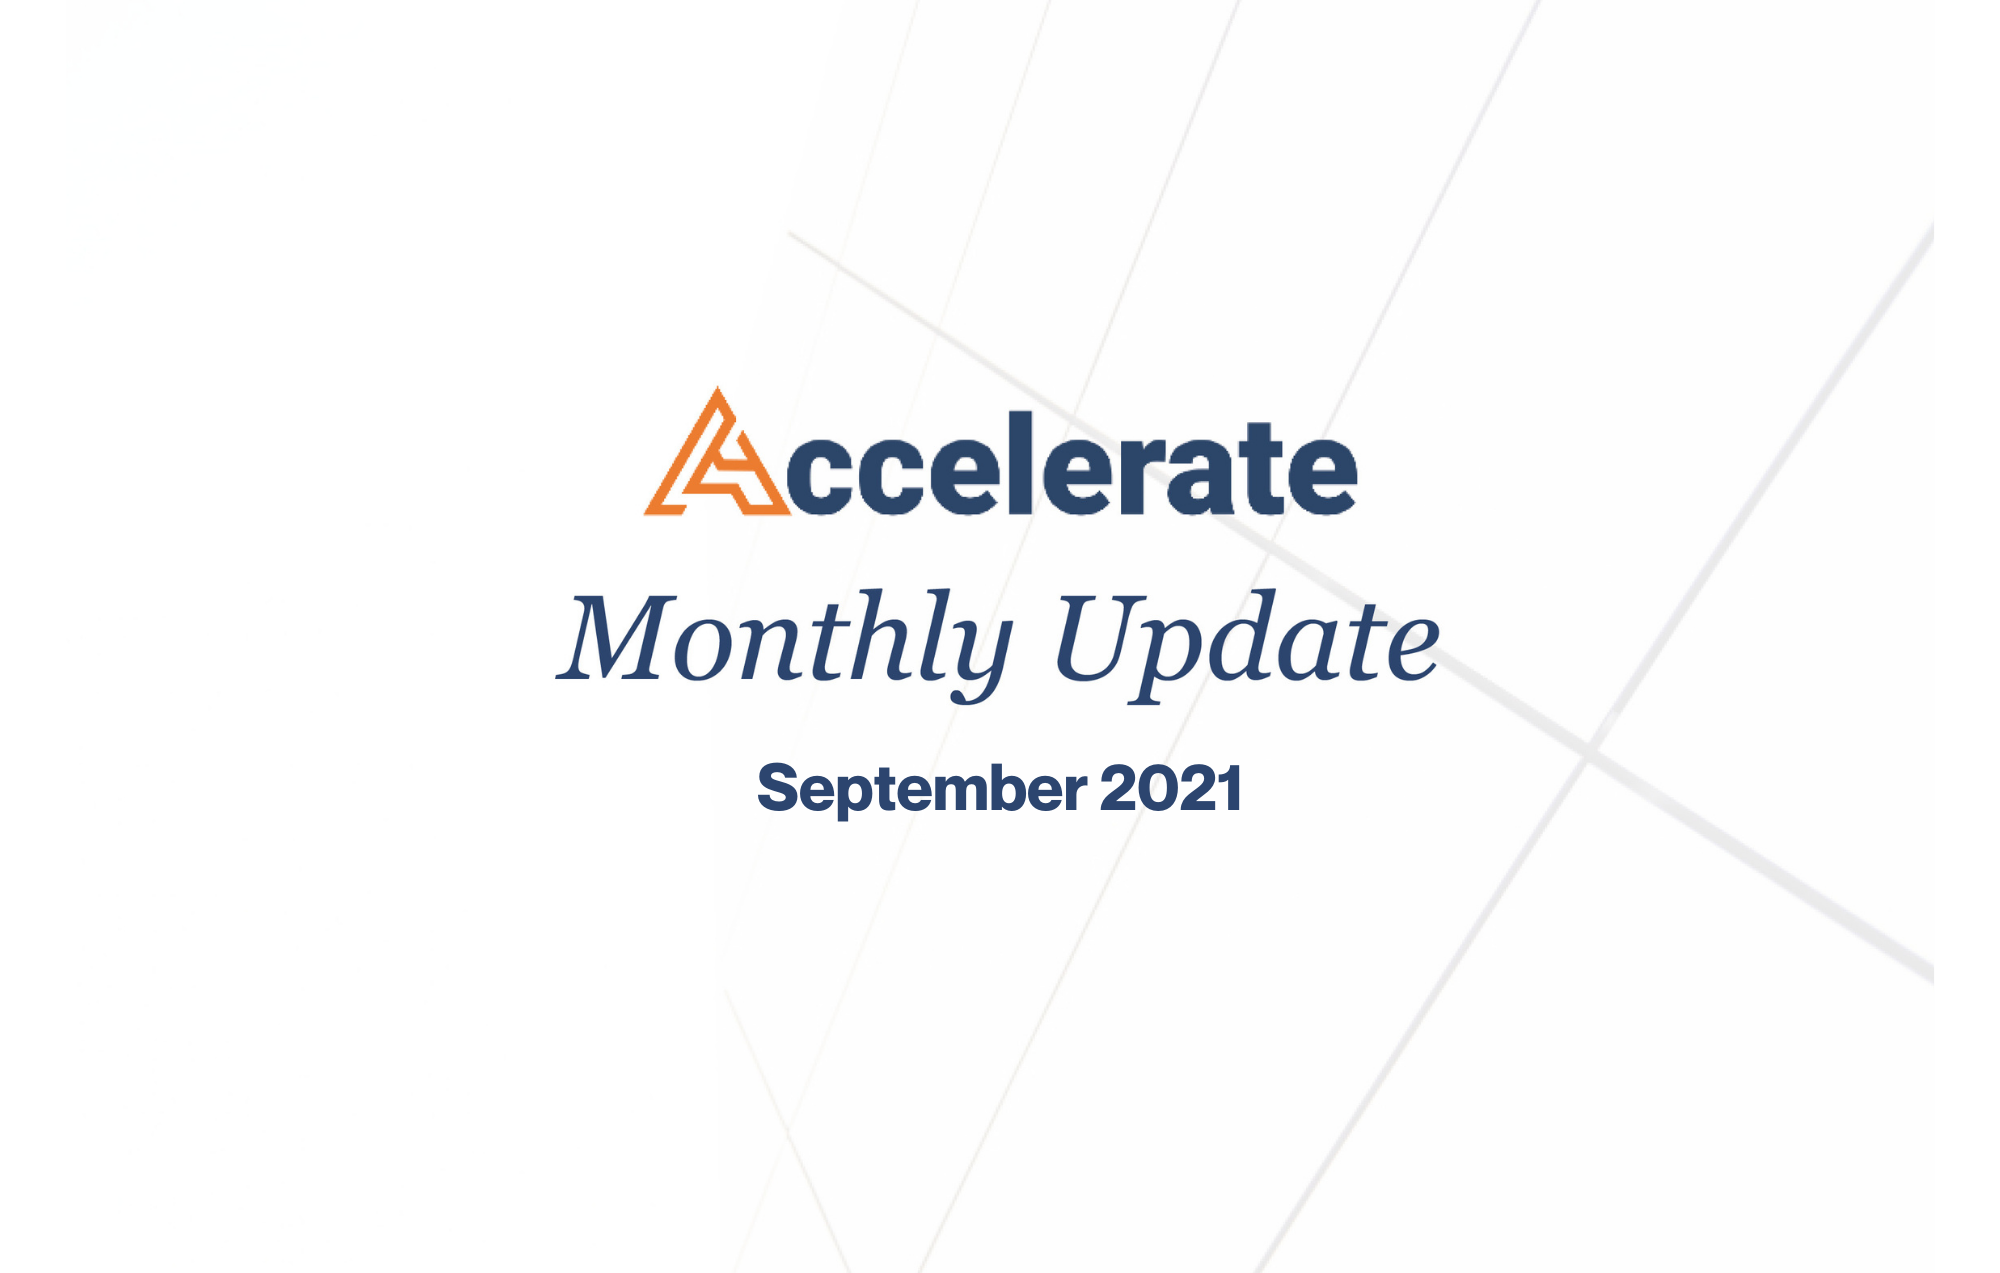 Accelerate Monthly Update: 60/40 is dead. Long live 60/40